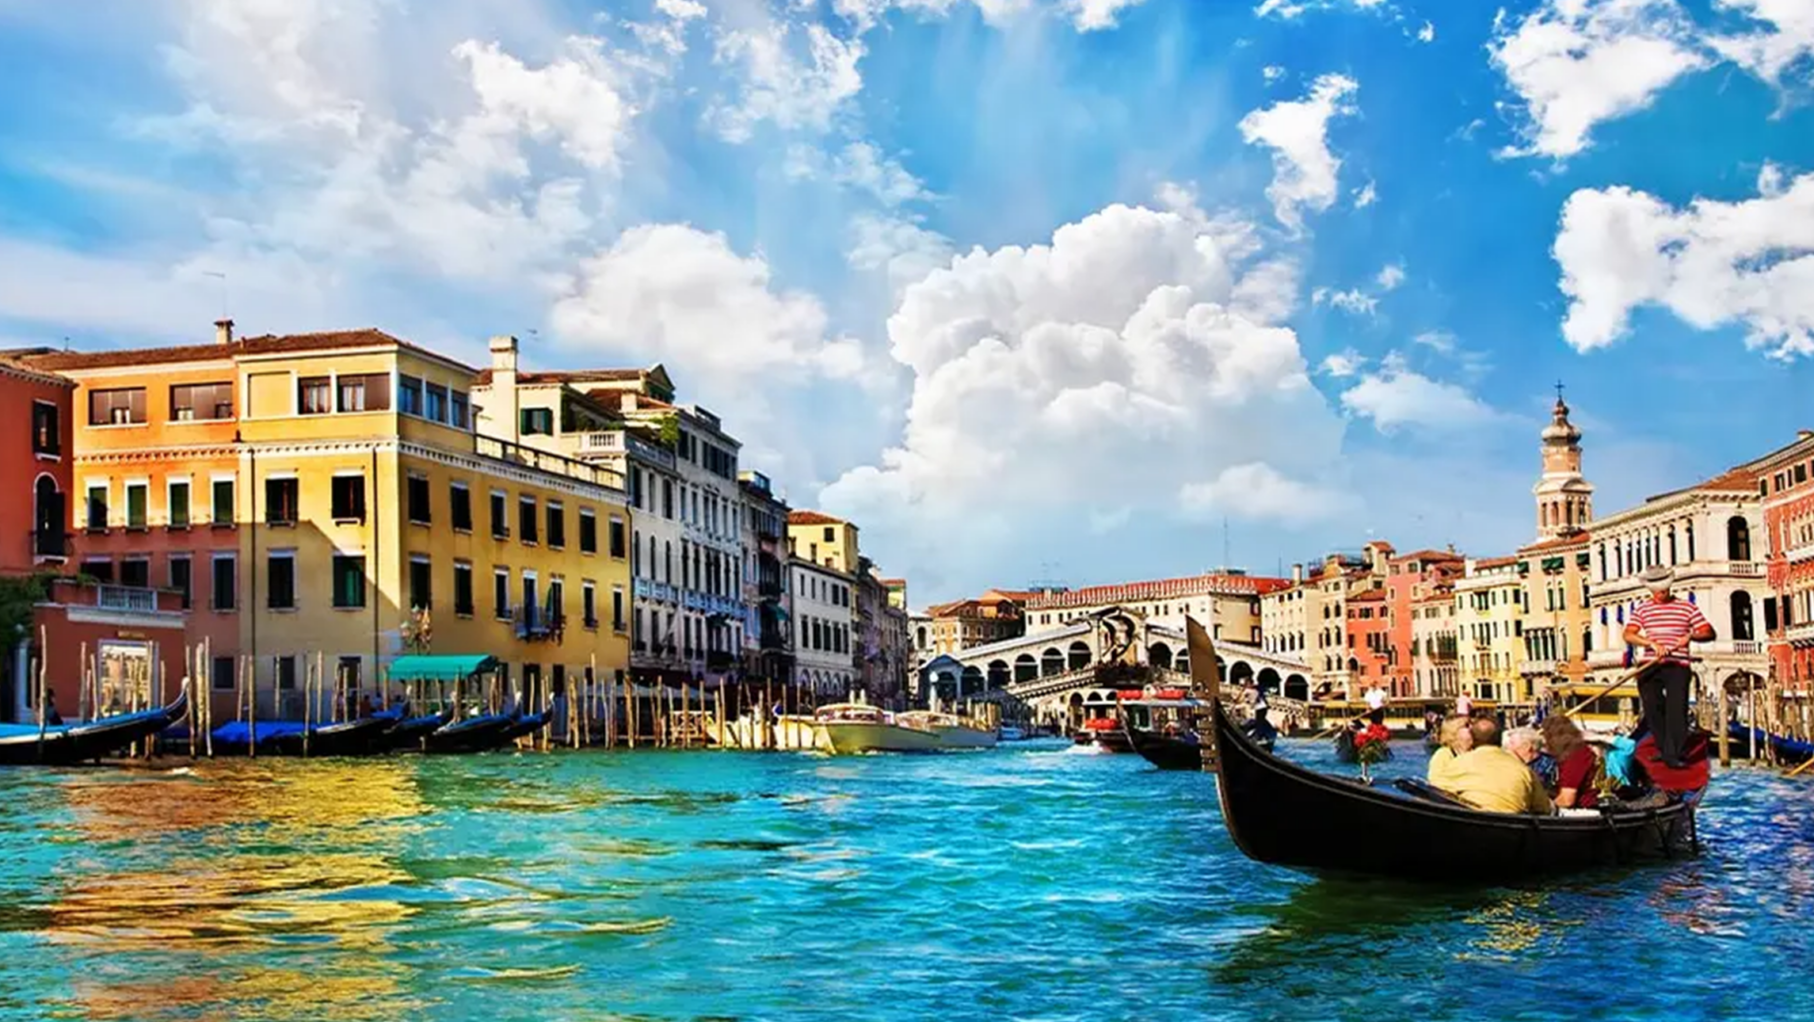 The waterways of Venice with a gondola